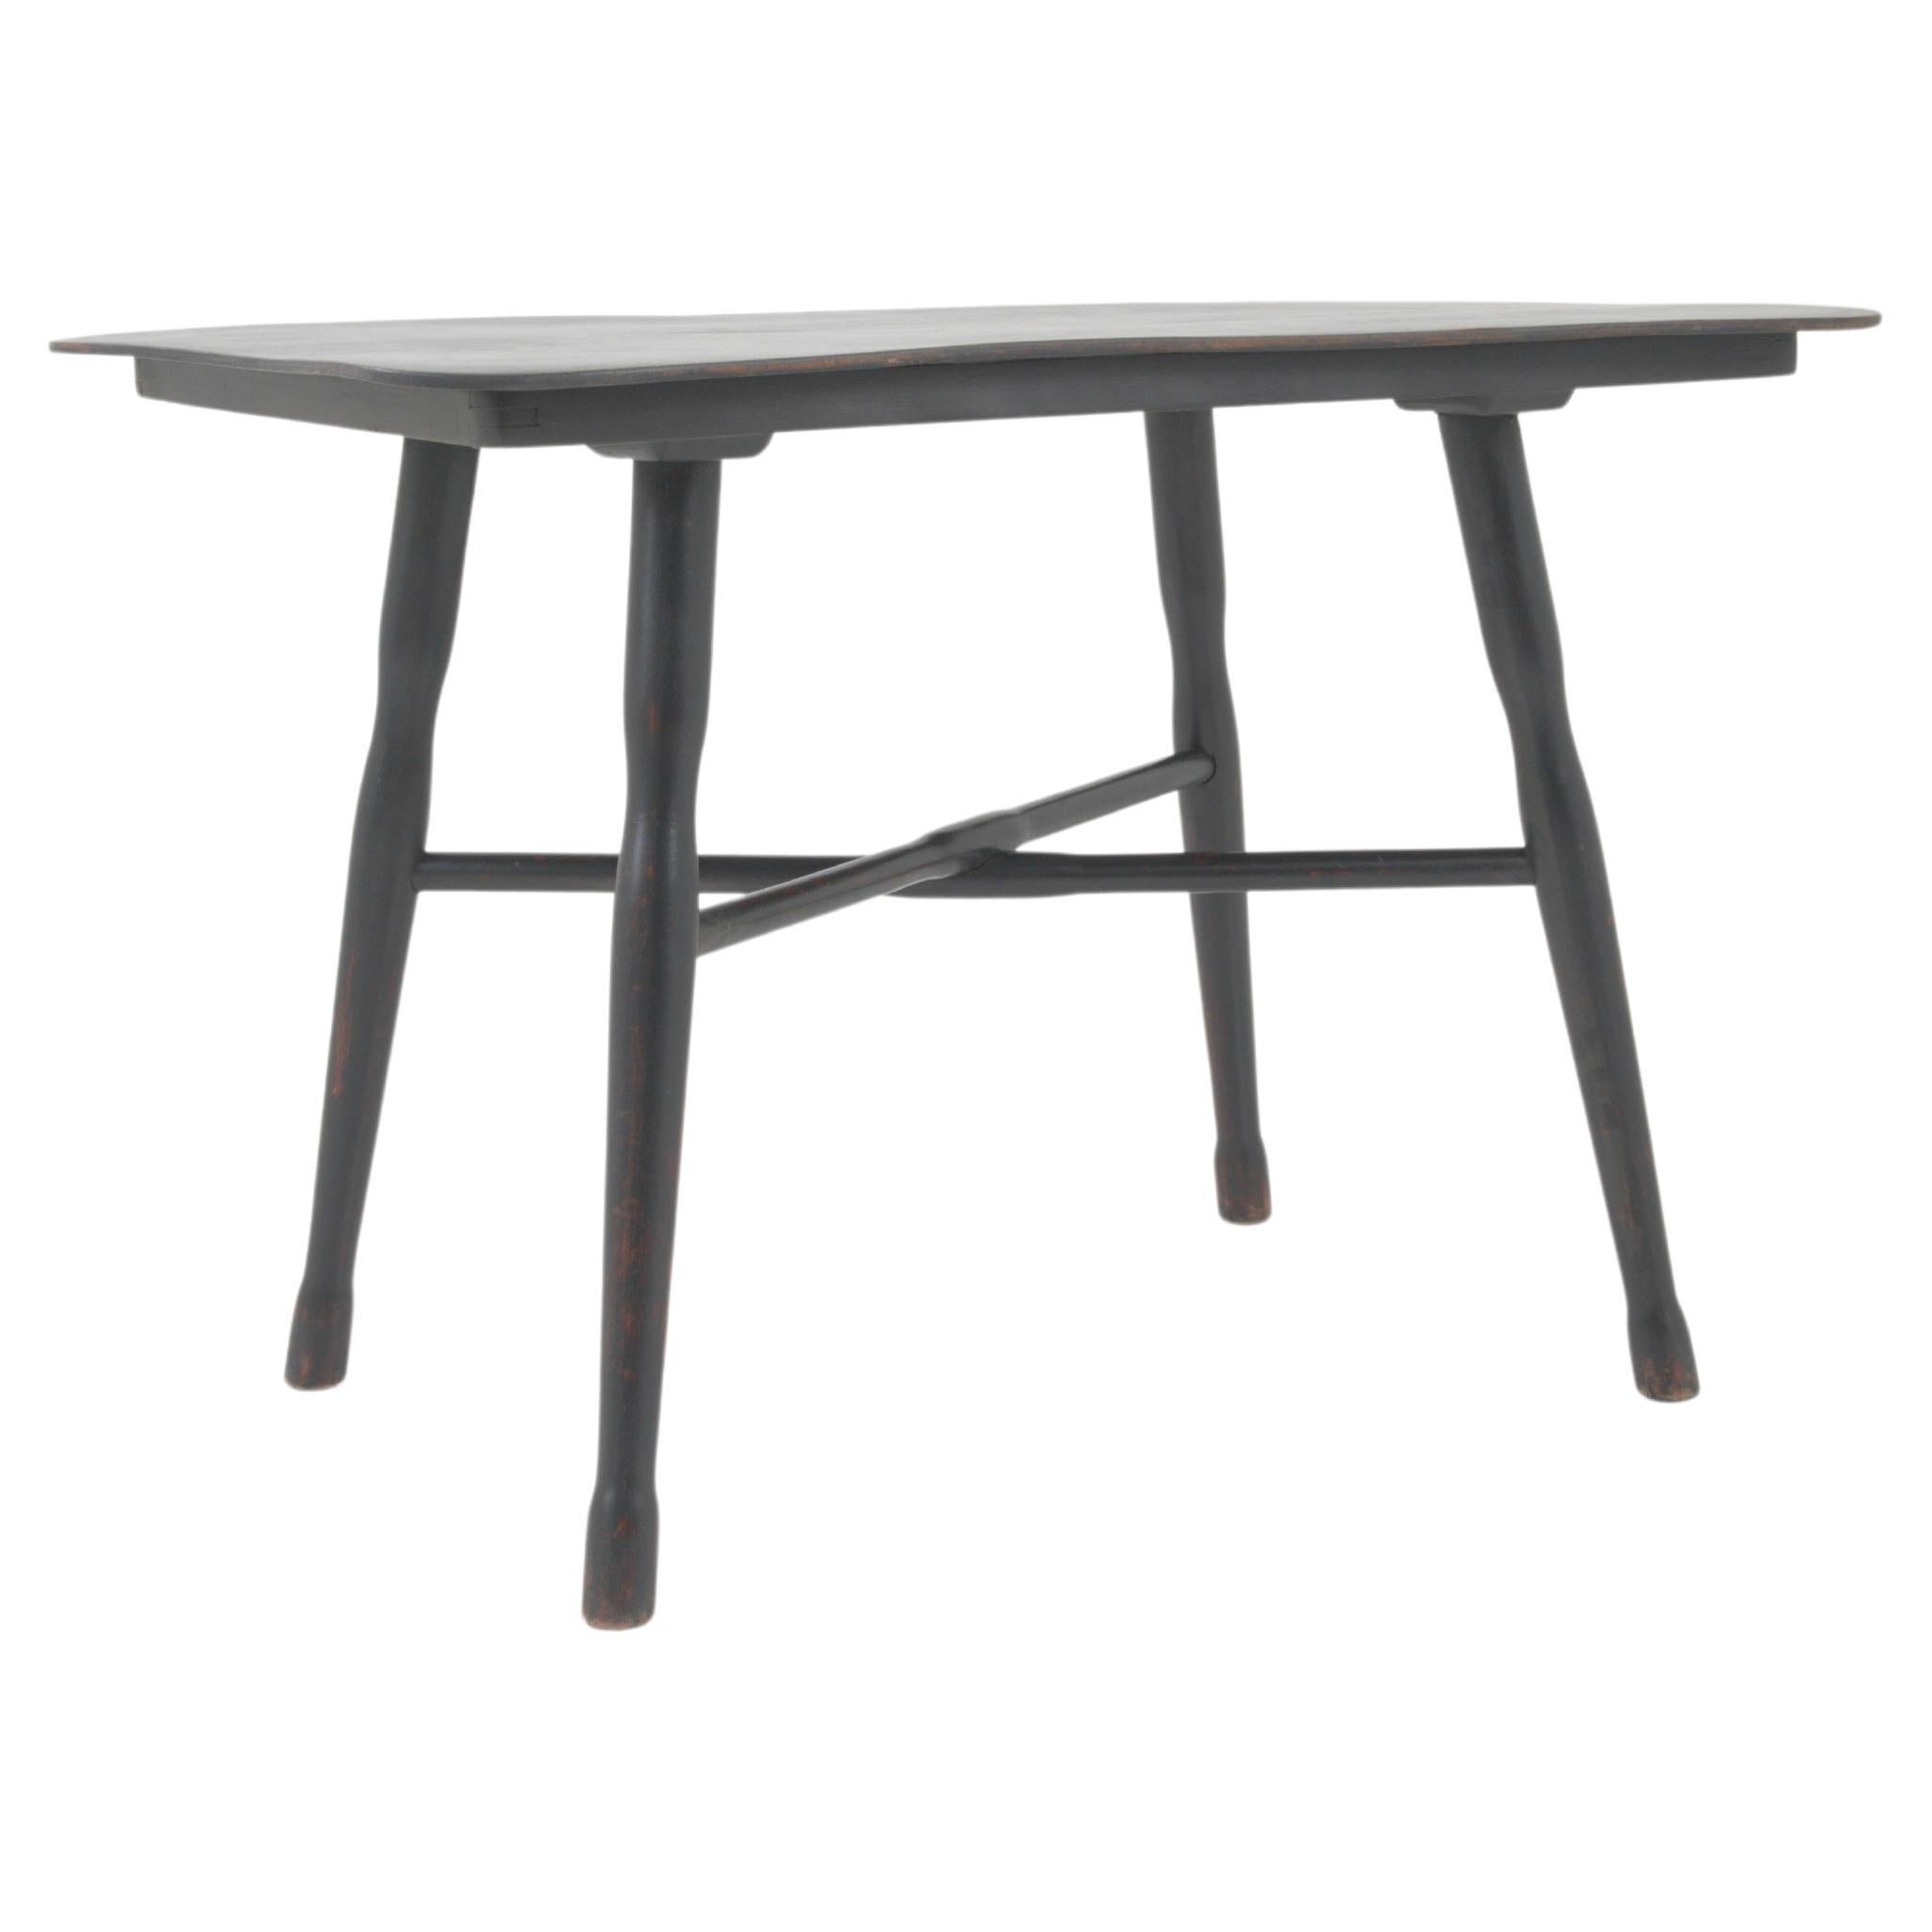 20th Century French Wood Black Patinated Side Table